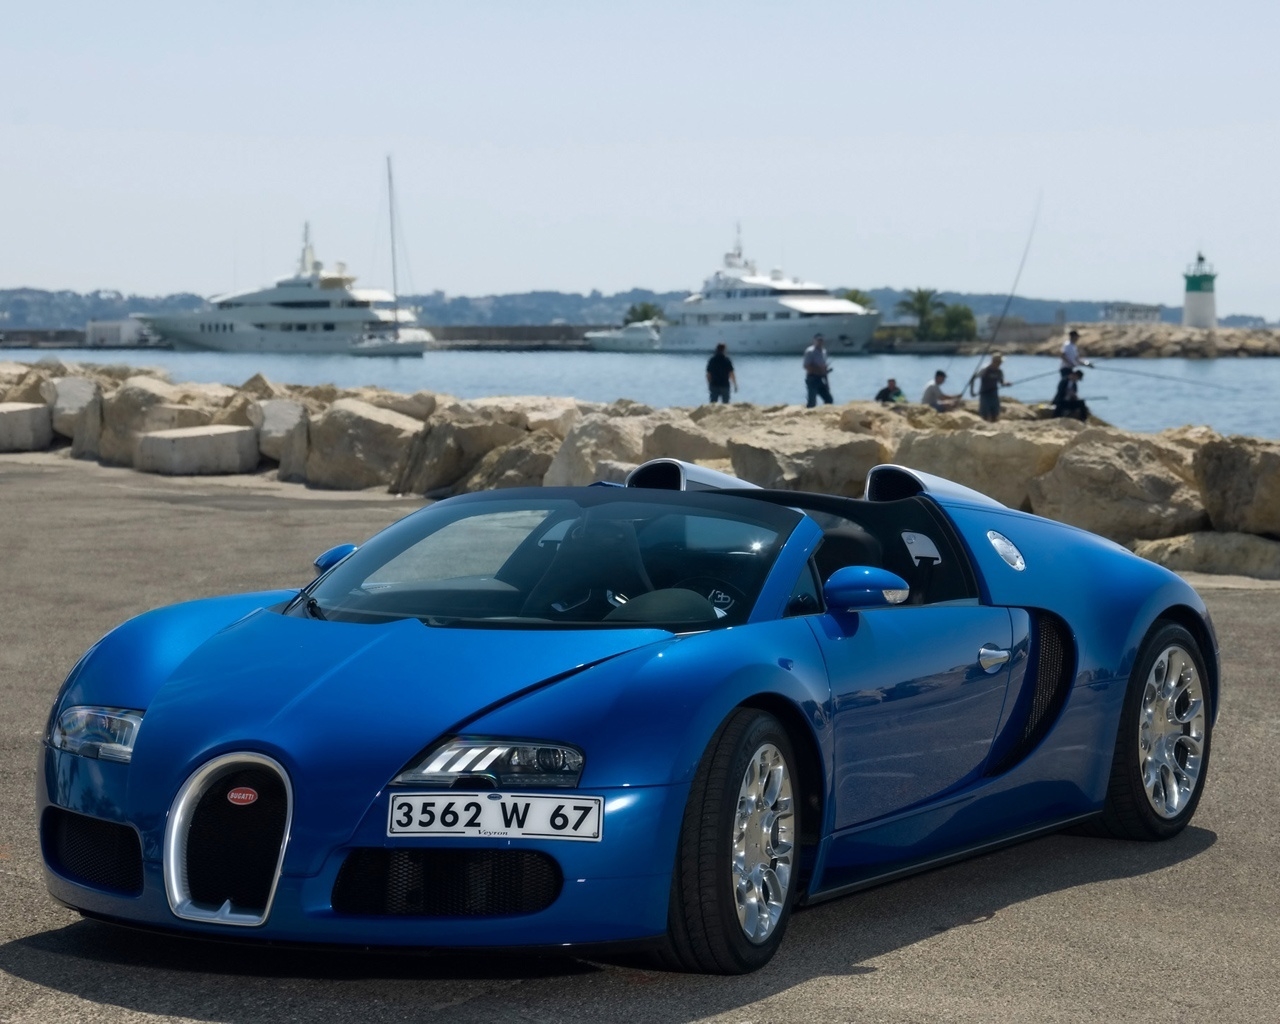 Bugatti Veyron 16.4 Grand Sport in Cannes 2010 - Front And Side 2 for 1280 x 1024 resolution